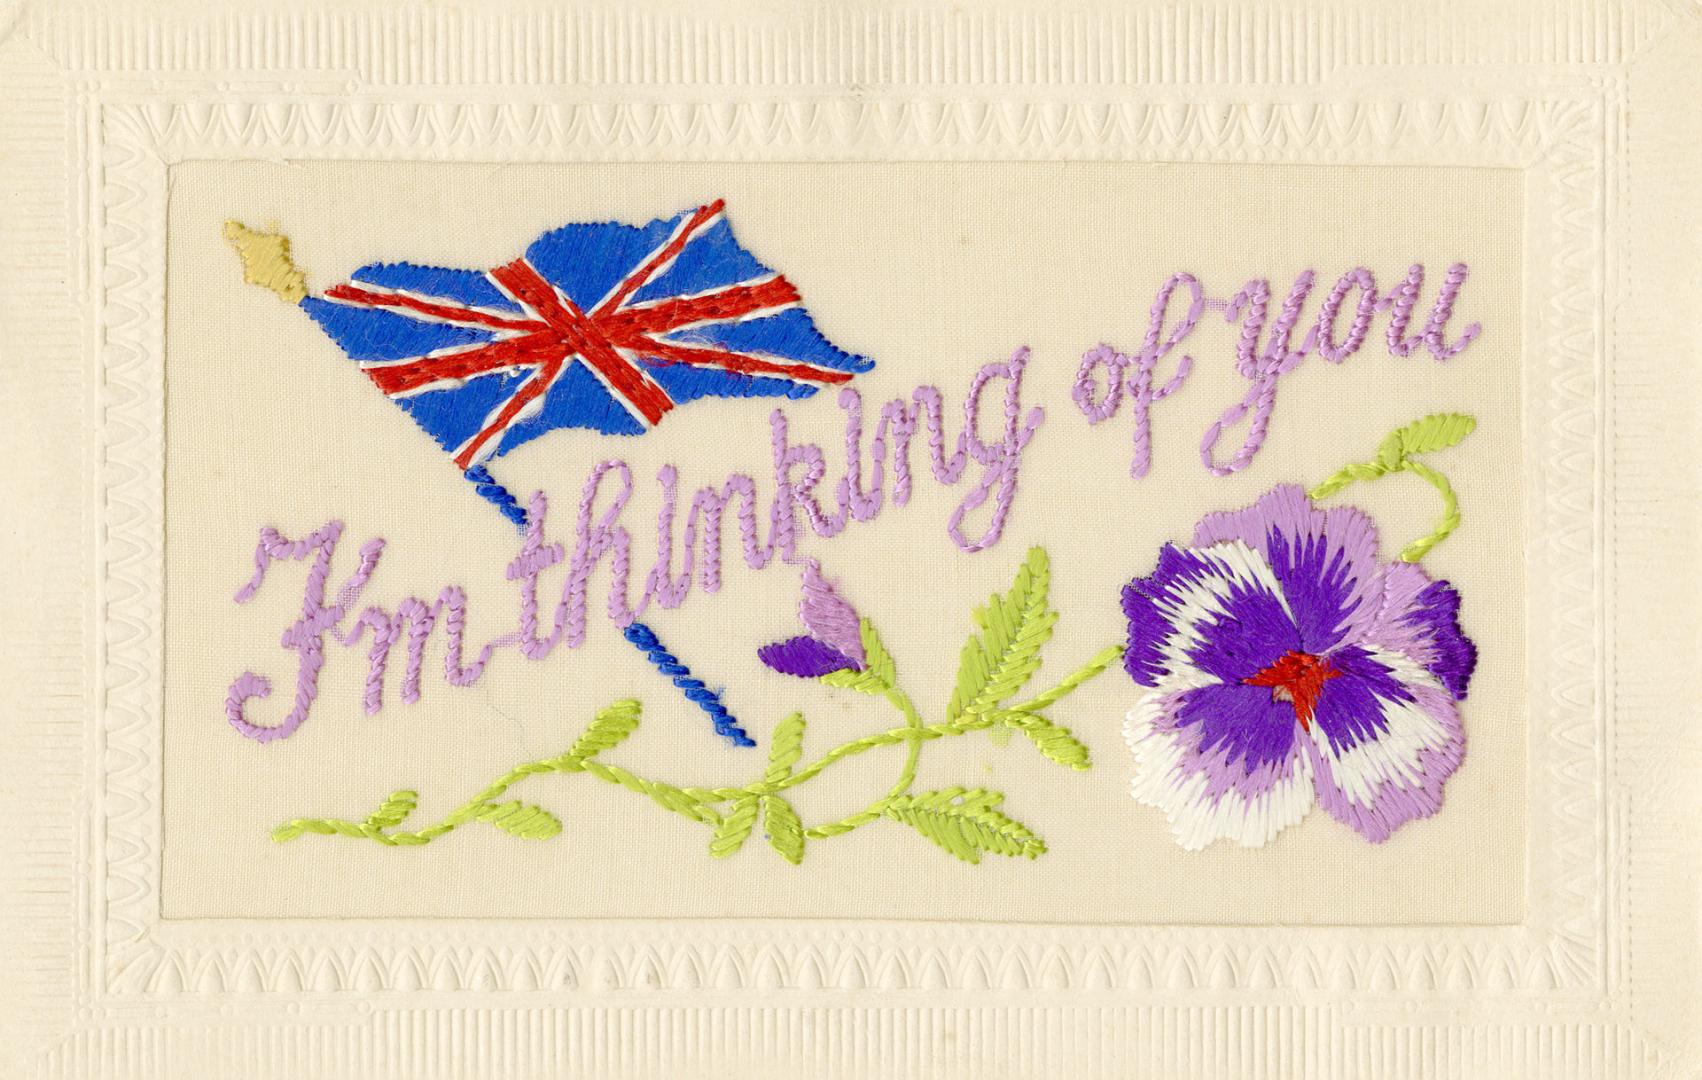 Silk embroidery of a Union Jack flag and a purple pansy. "I'm thinking of you is embroidered in ...